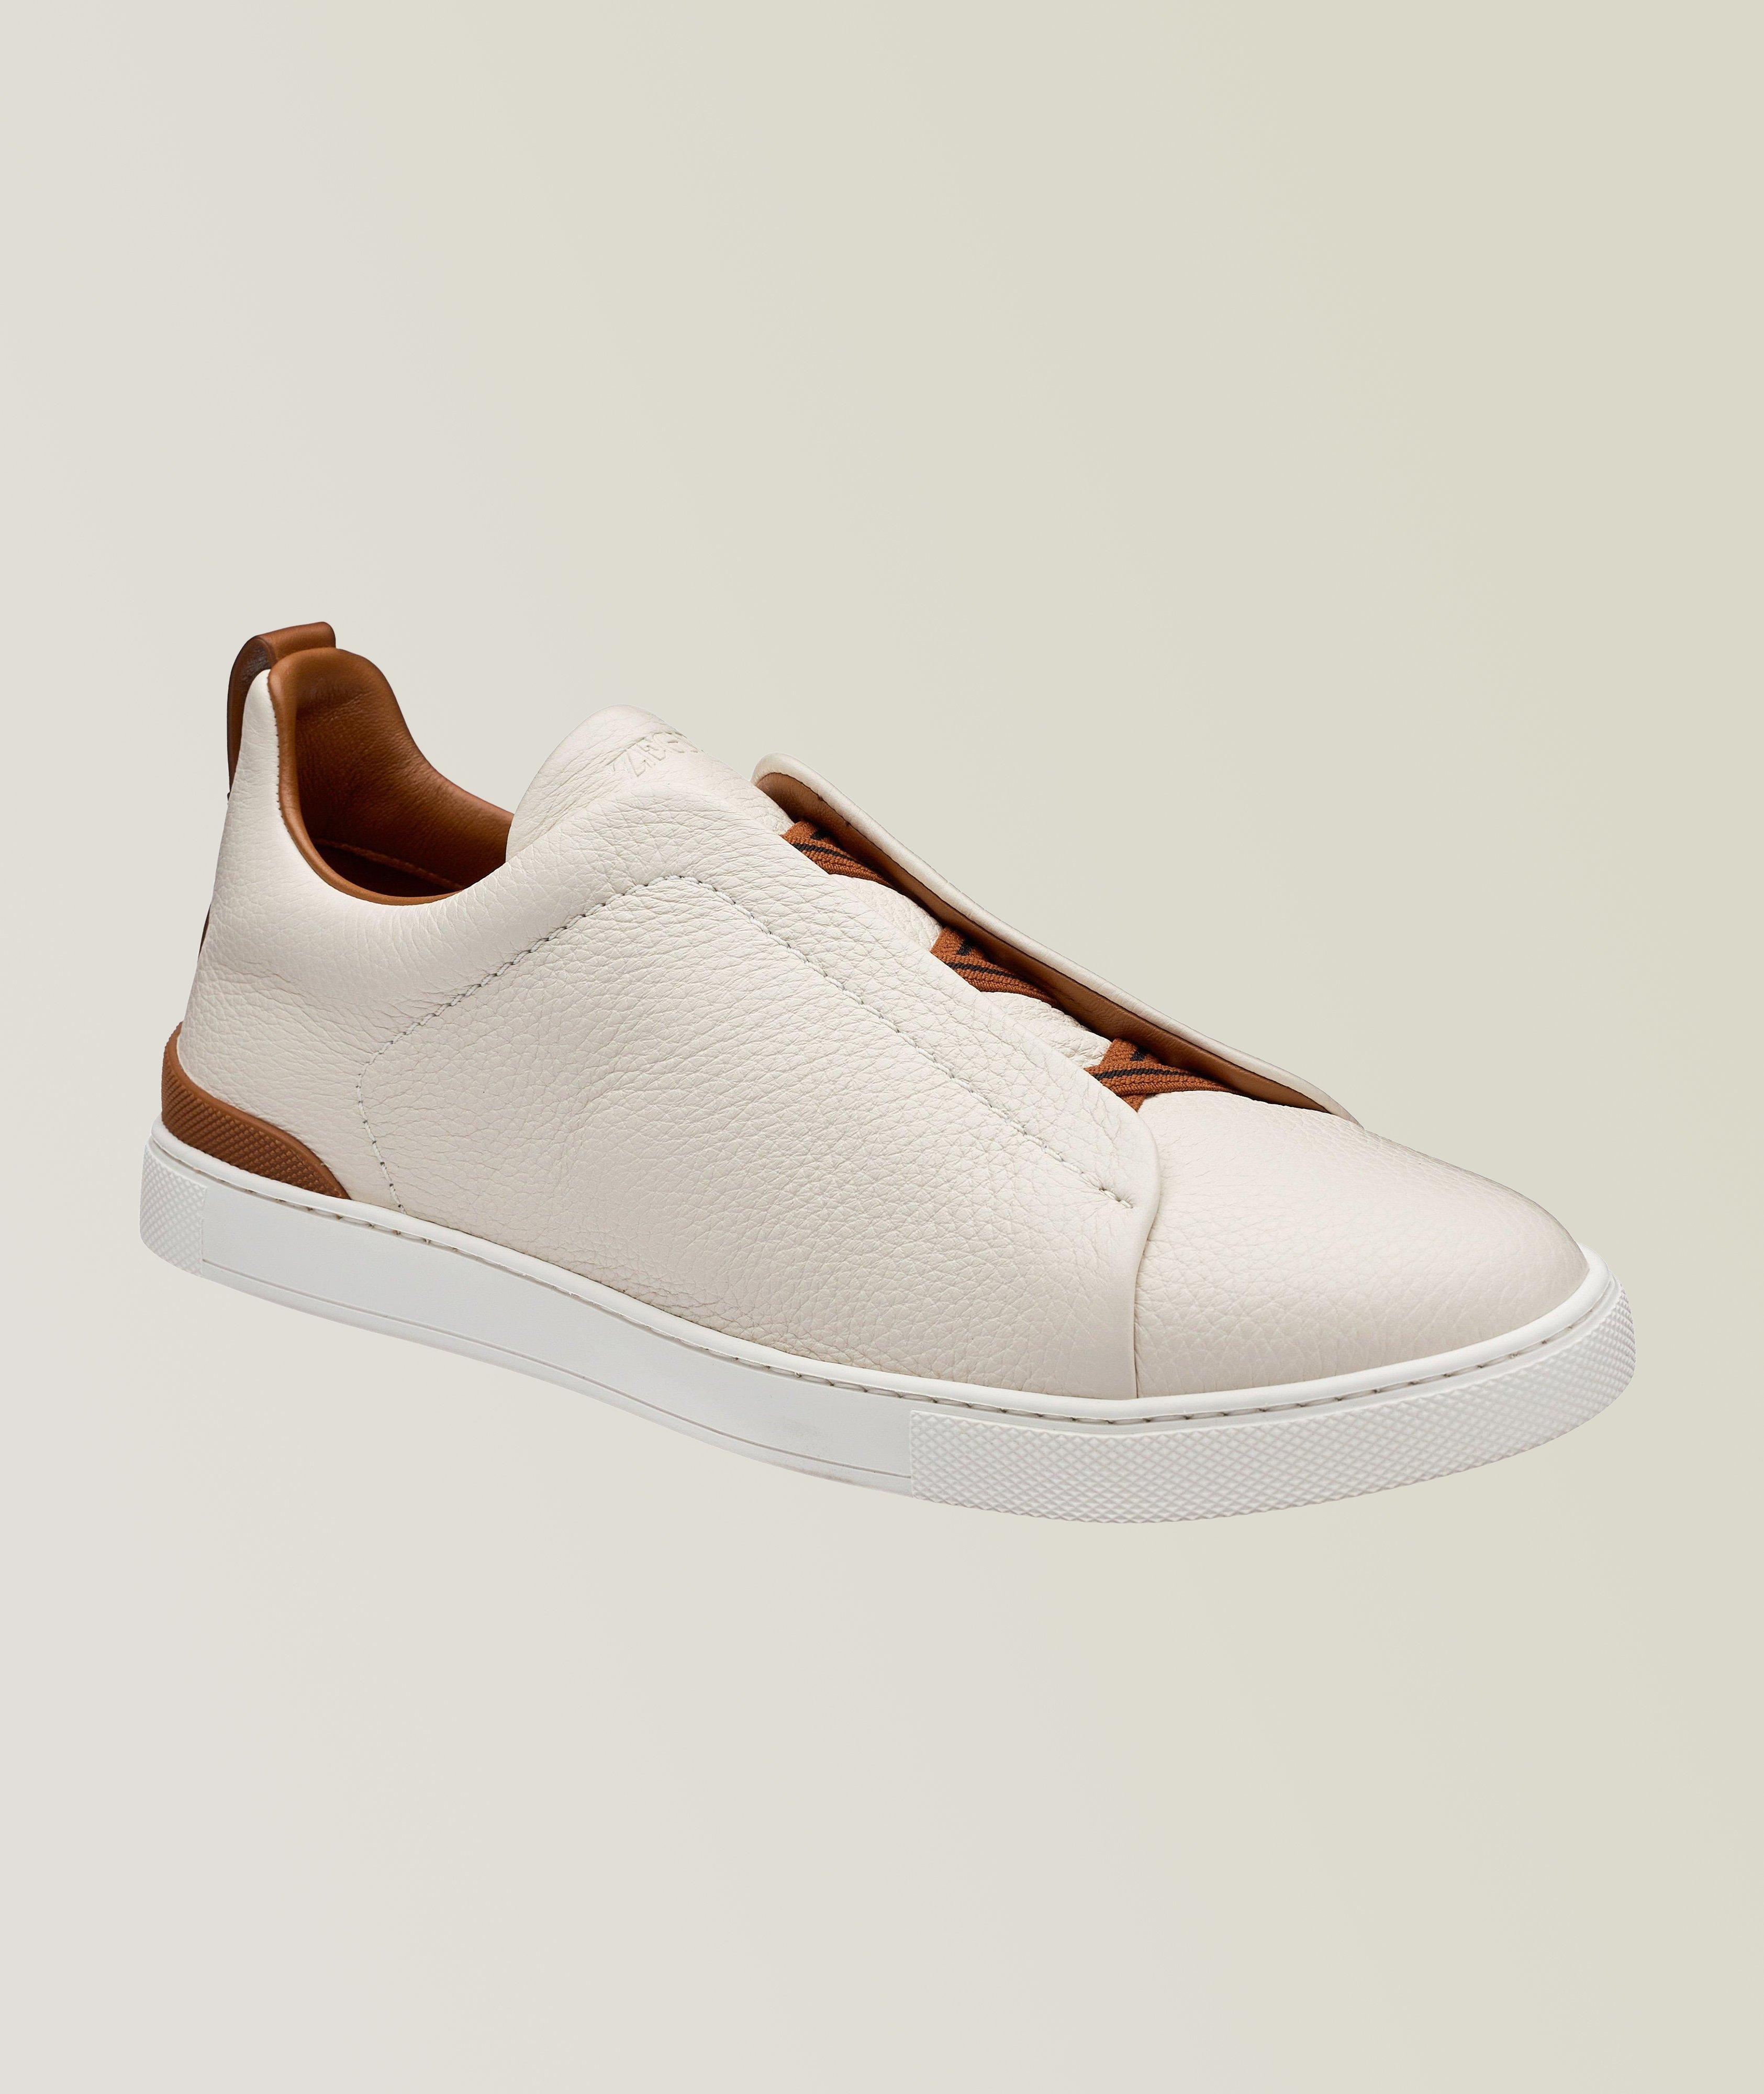 Triple Stitch Leather Slip-On Sneakers image 0